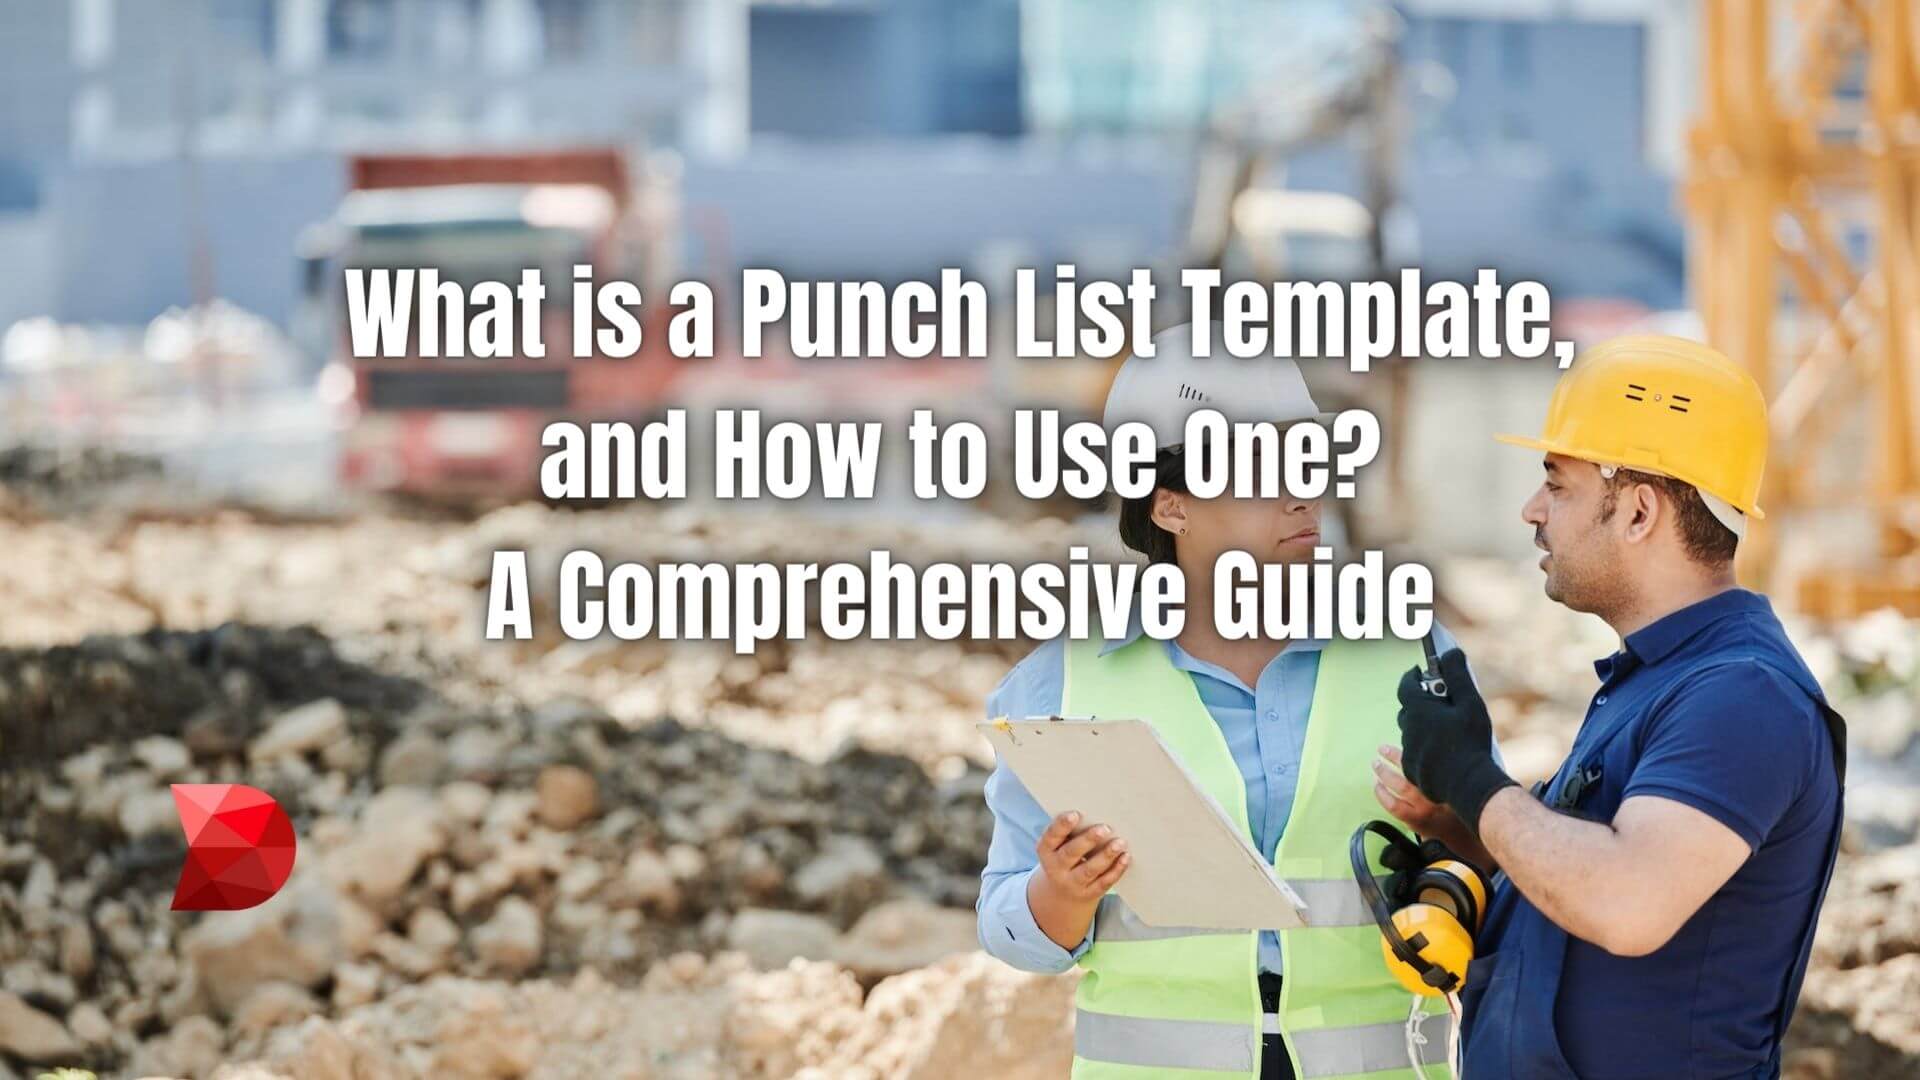 This article will discuss what a punch list template is, how to use one and the essential things that should be included. Learn more!